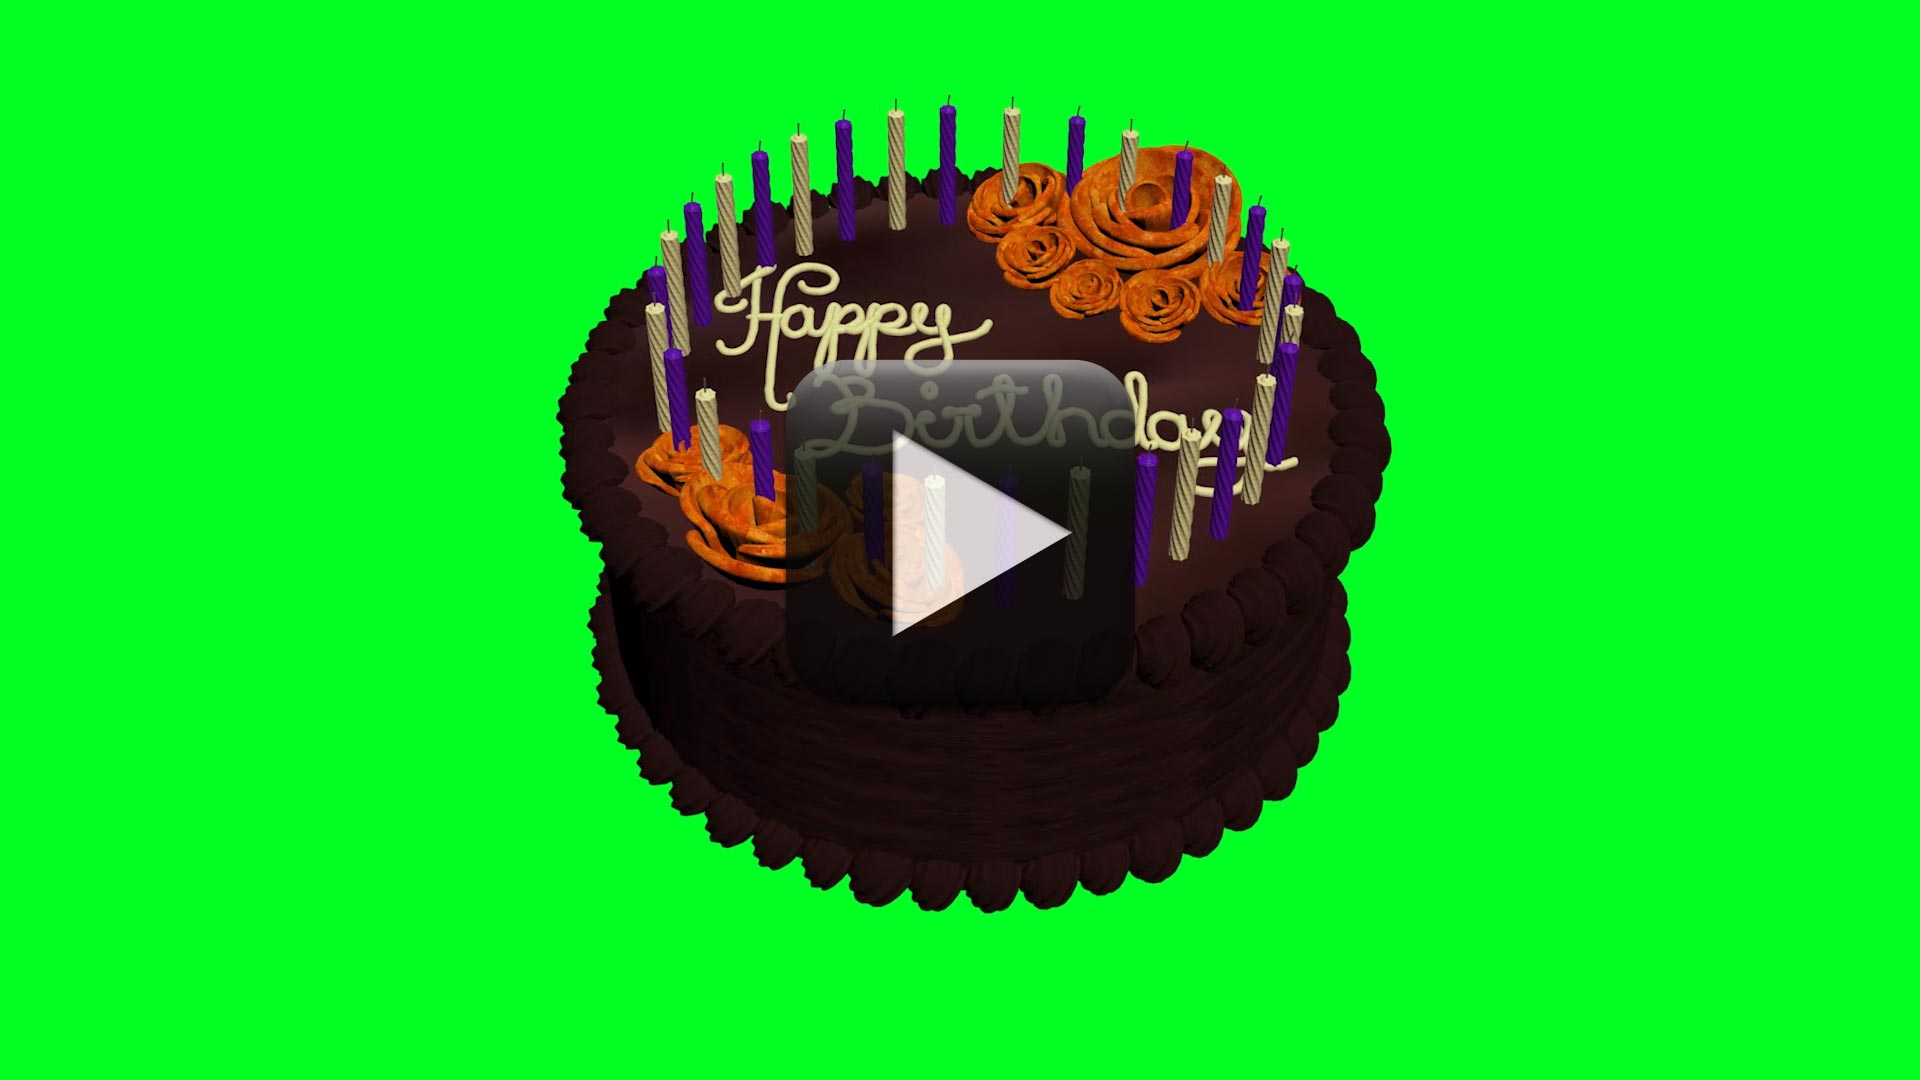 Awe-Inspiring Collection of Full 4K Love Birthday Cake Images - Over 999  Amazing Options